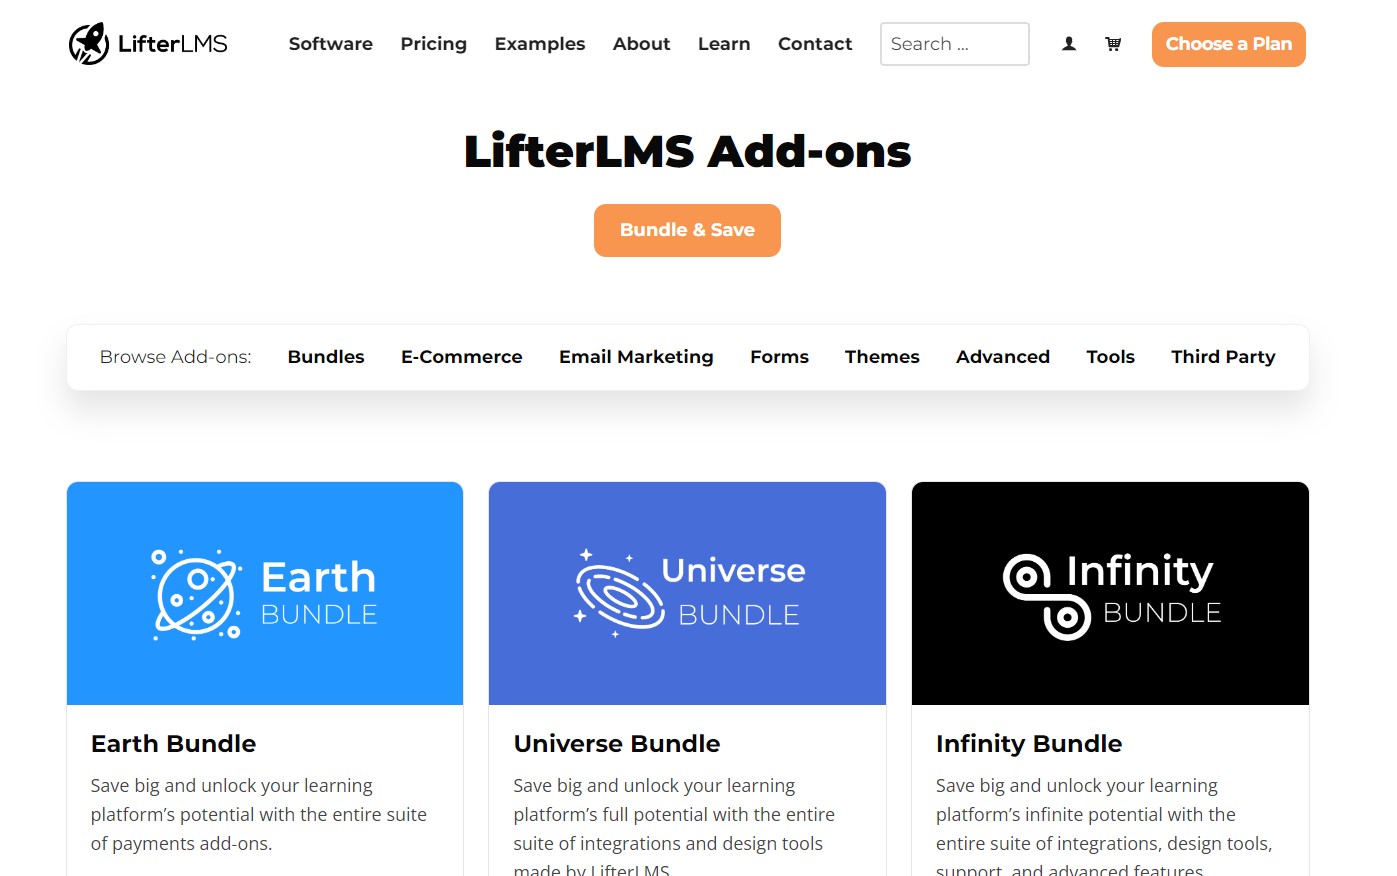 lifterlms add ons